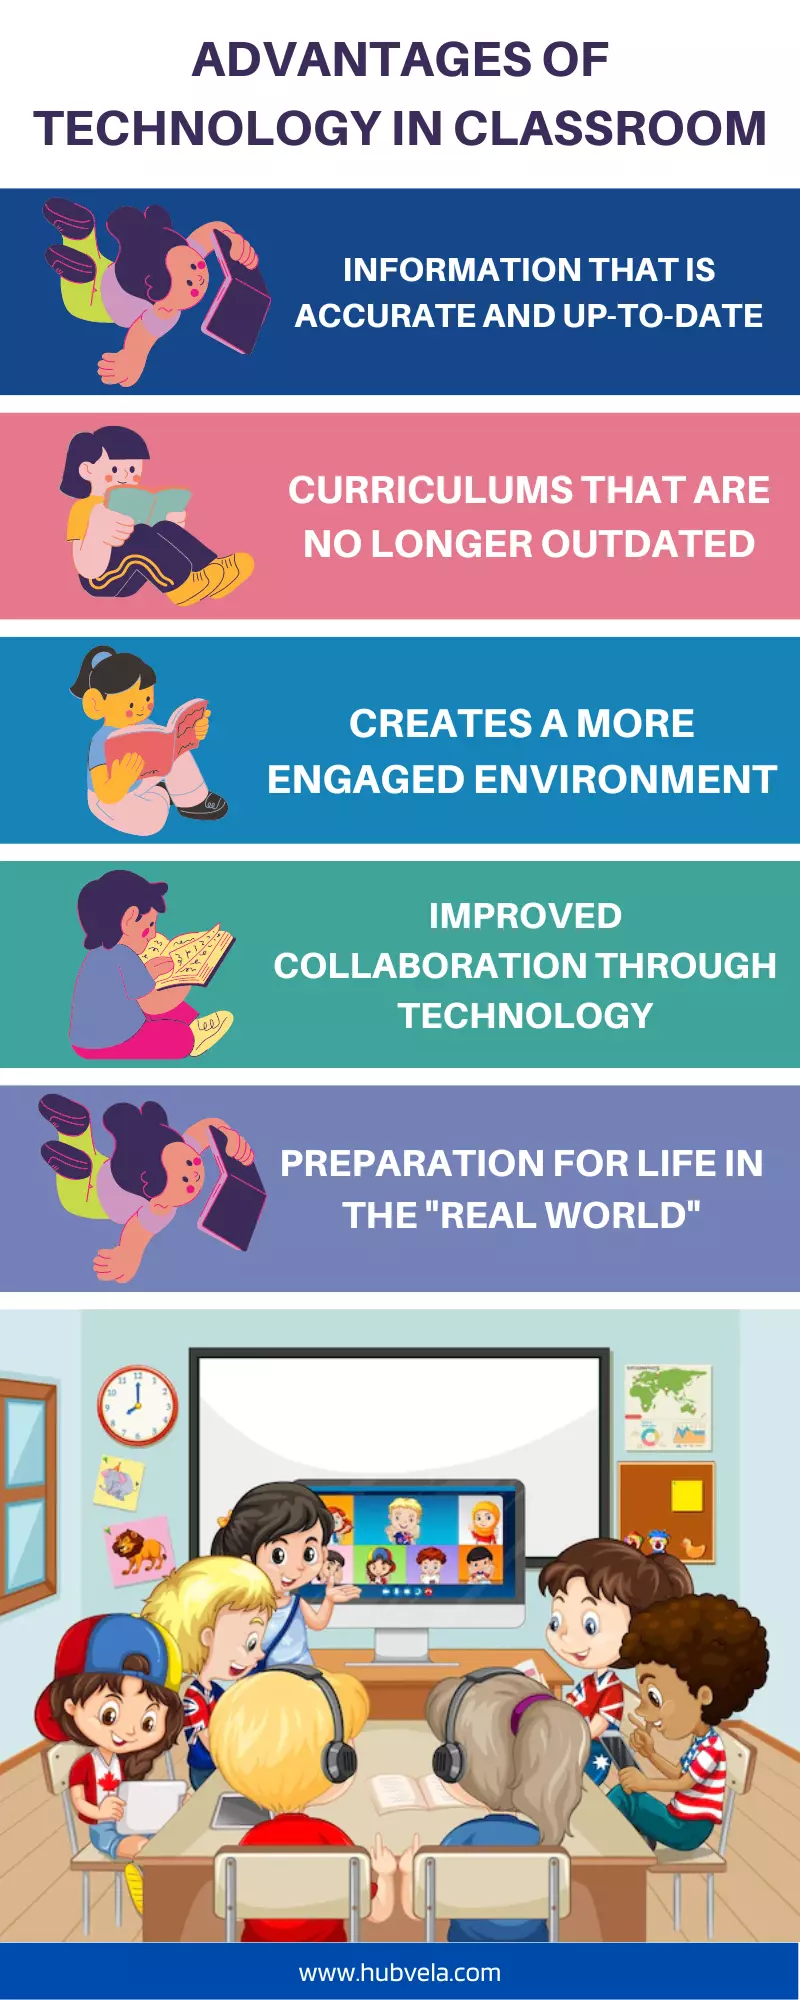 Technology advantages in classrooms infographic